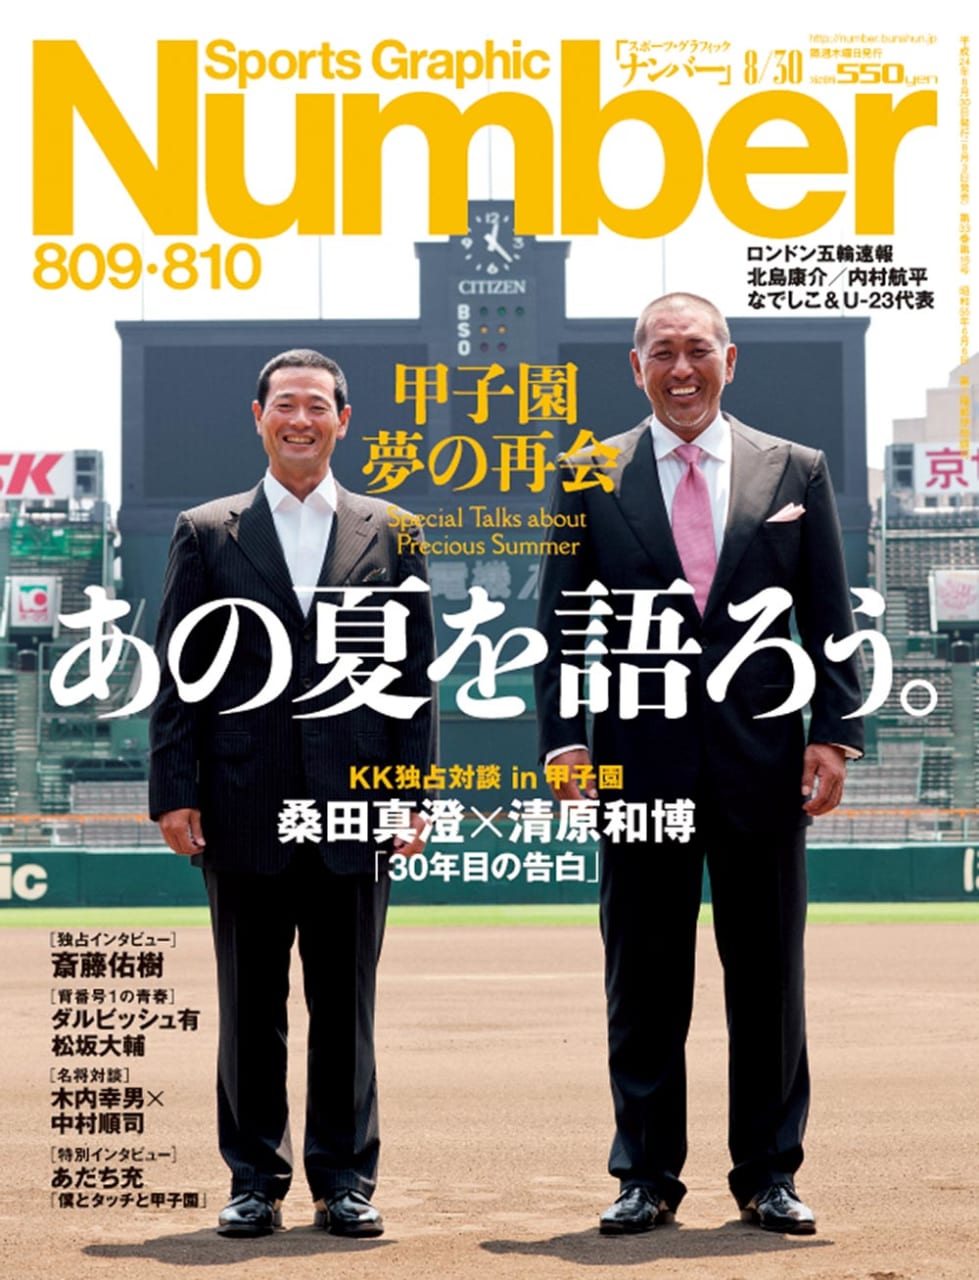 Sports Graphic Number 809･810号
2012年8月3日発売
 表紙撮影：小林紀晴